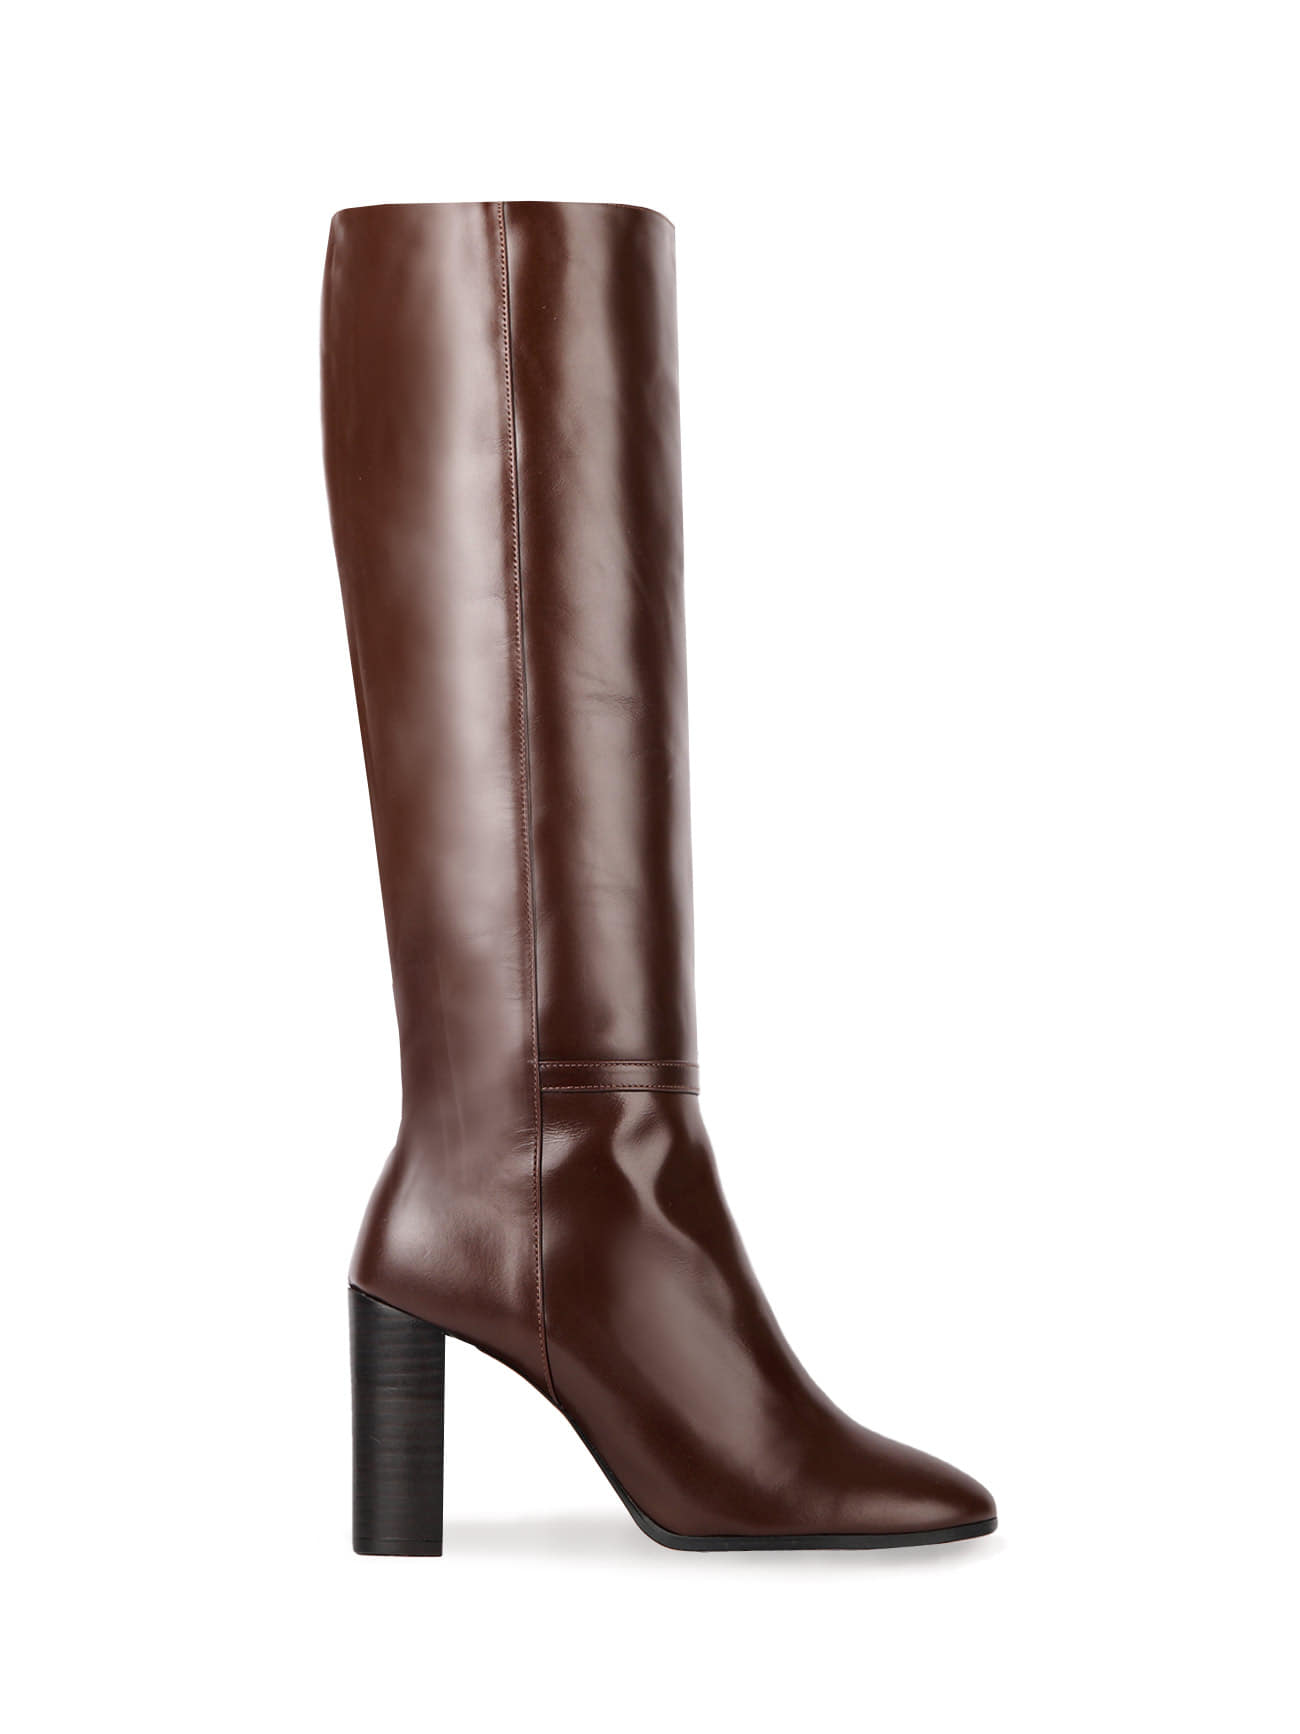 KATE LEATHER KNEE BOOTS - CHOCO